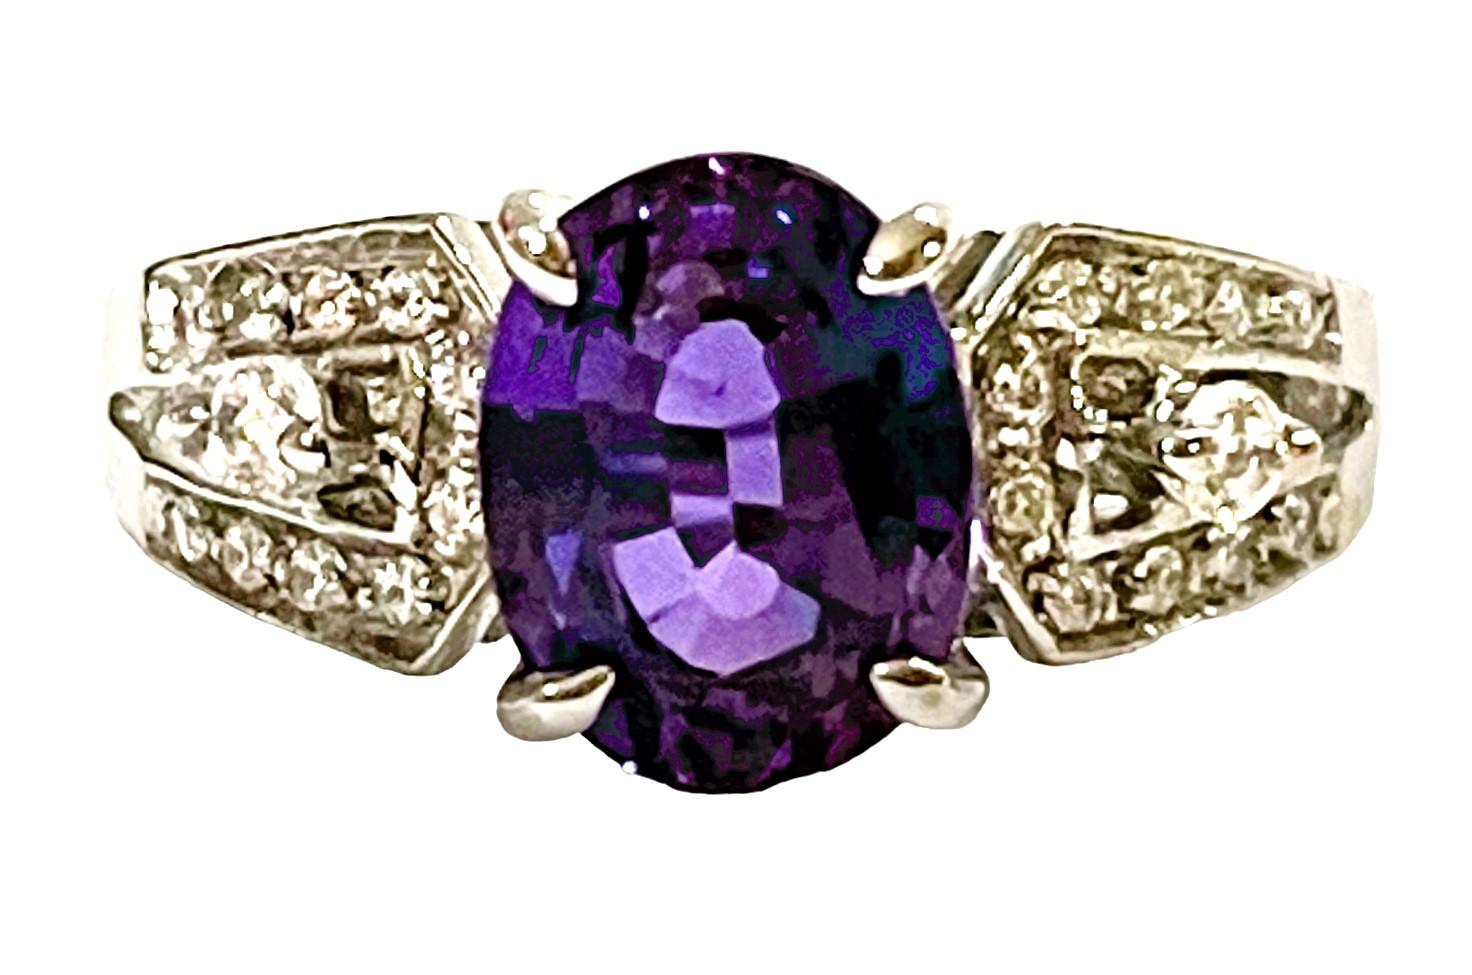 What beautiful colors in this ring!  The ring is a size 6.75  This stone is from Brazil and is just exquisite. It is an authentic natural stone. It is a highly rated stone.  It is an Oval cut stone and is 1.80 Cts   The main stone is 8.8 x 6.8 mm